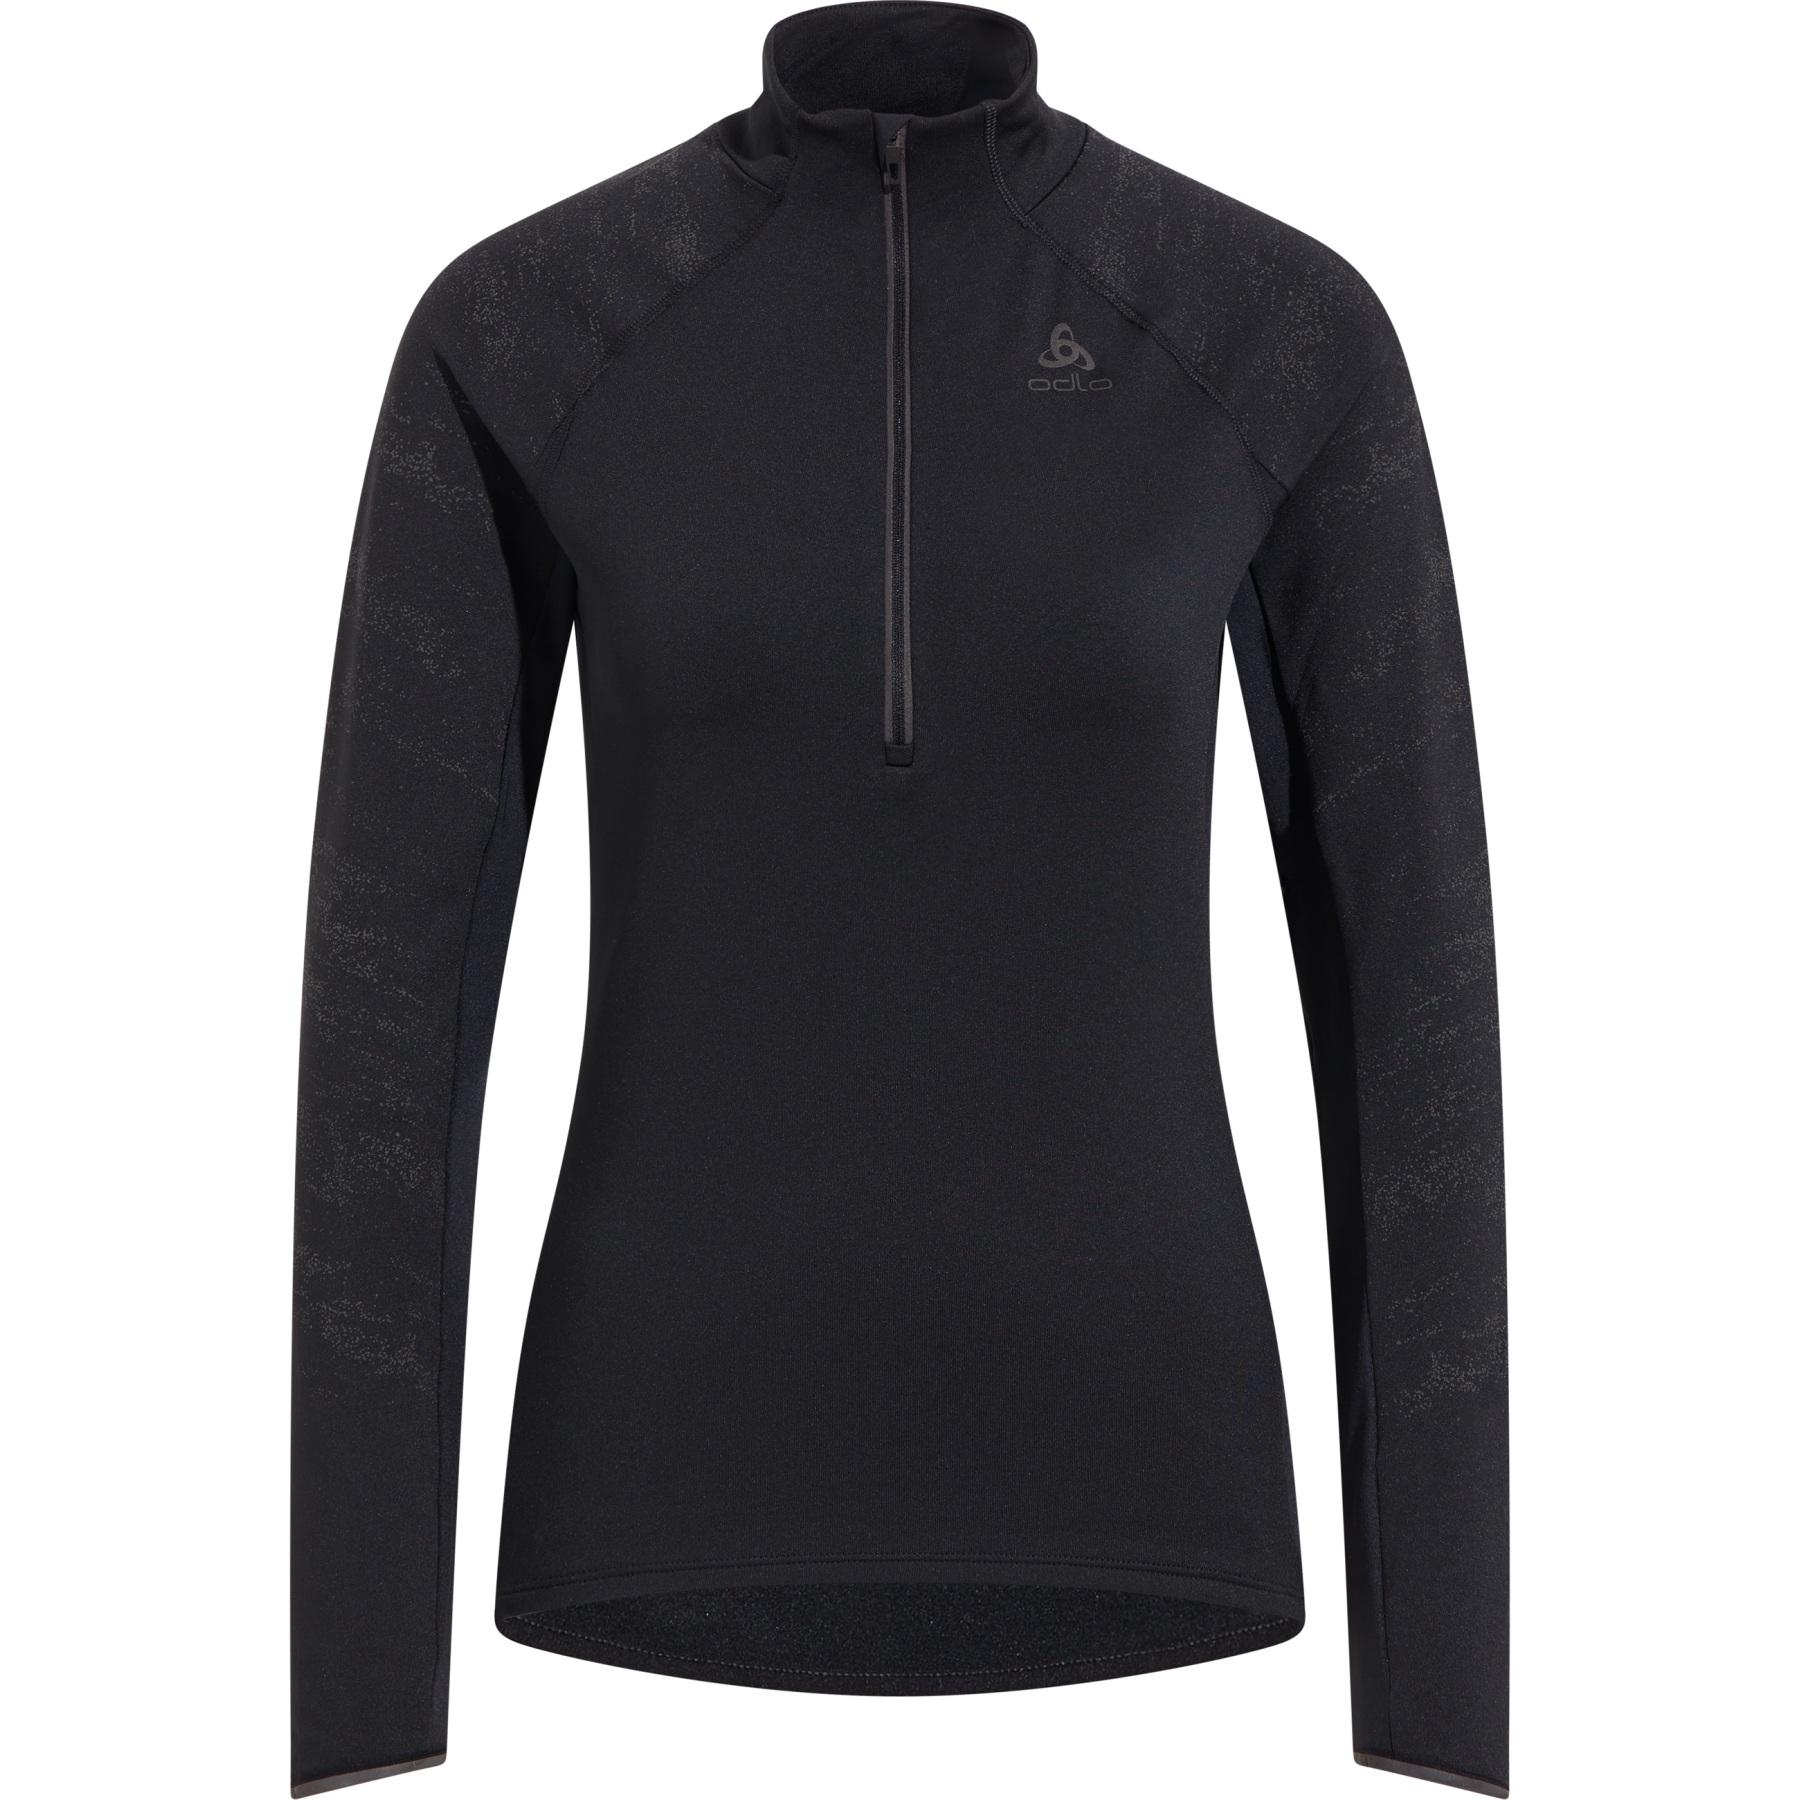 Picture of Odlo Zeroweight Ceramiwarm Reflective Mid Layer Women - black